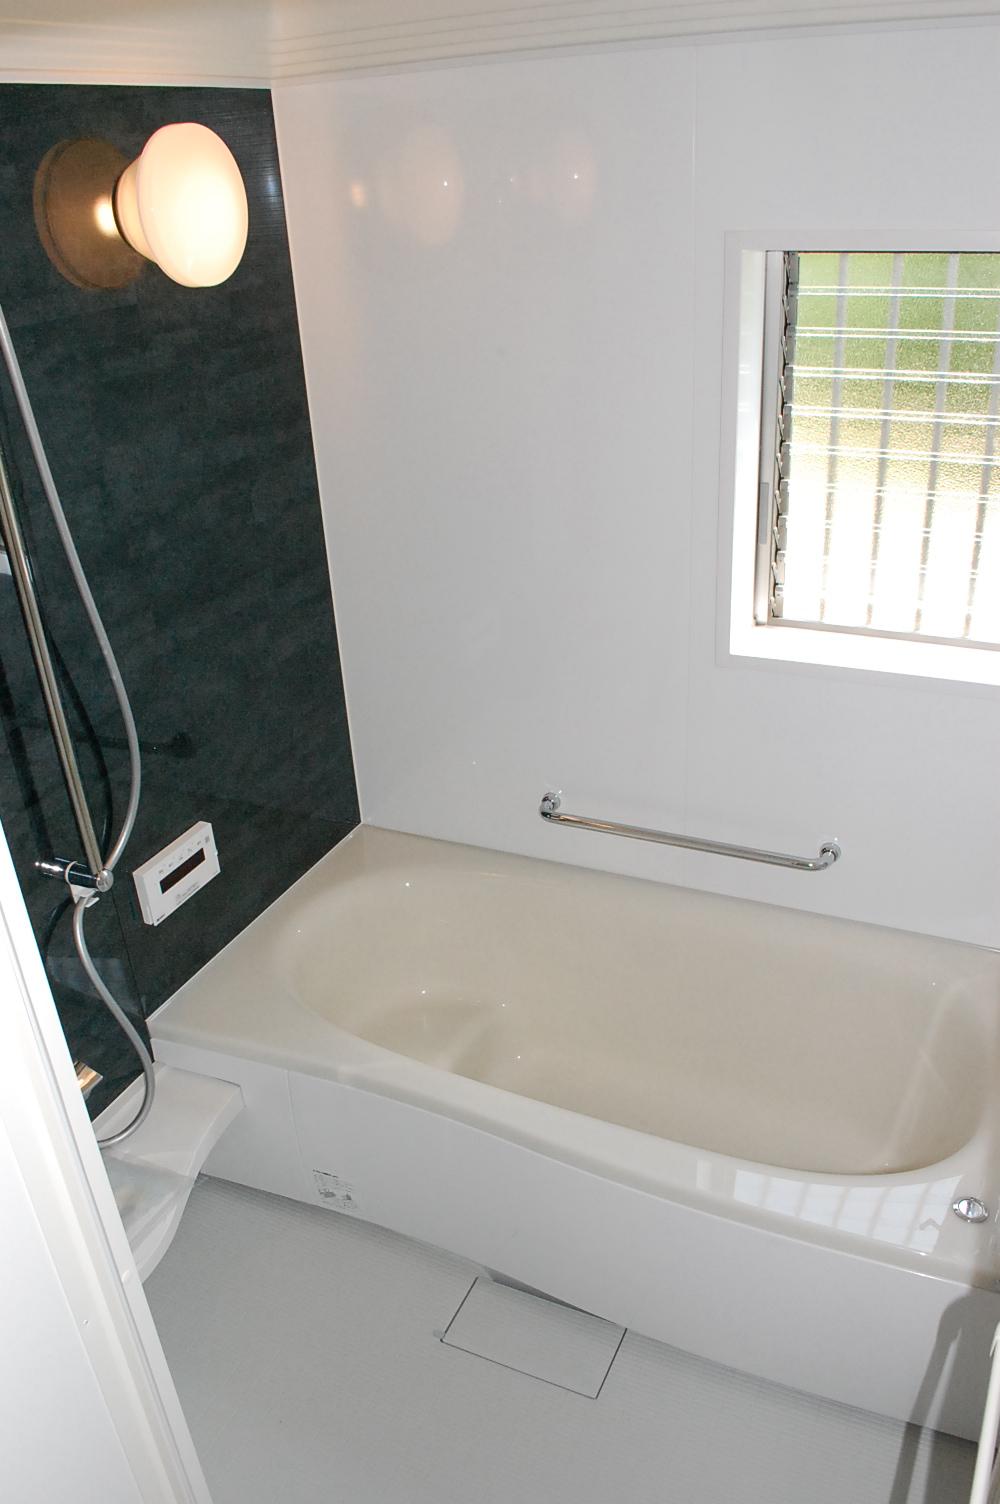 Same specifications photo (bathroom). In unit bus of 1 pyeong type, It is the size that comfortably put in extending the leg. Thermos bathtub